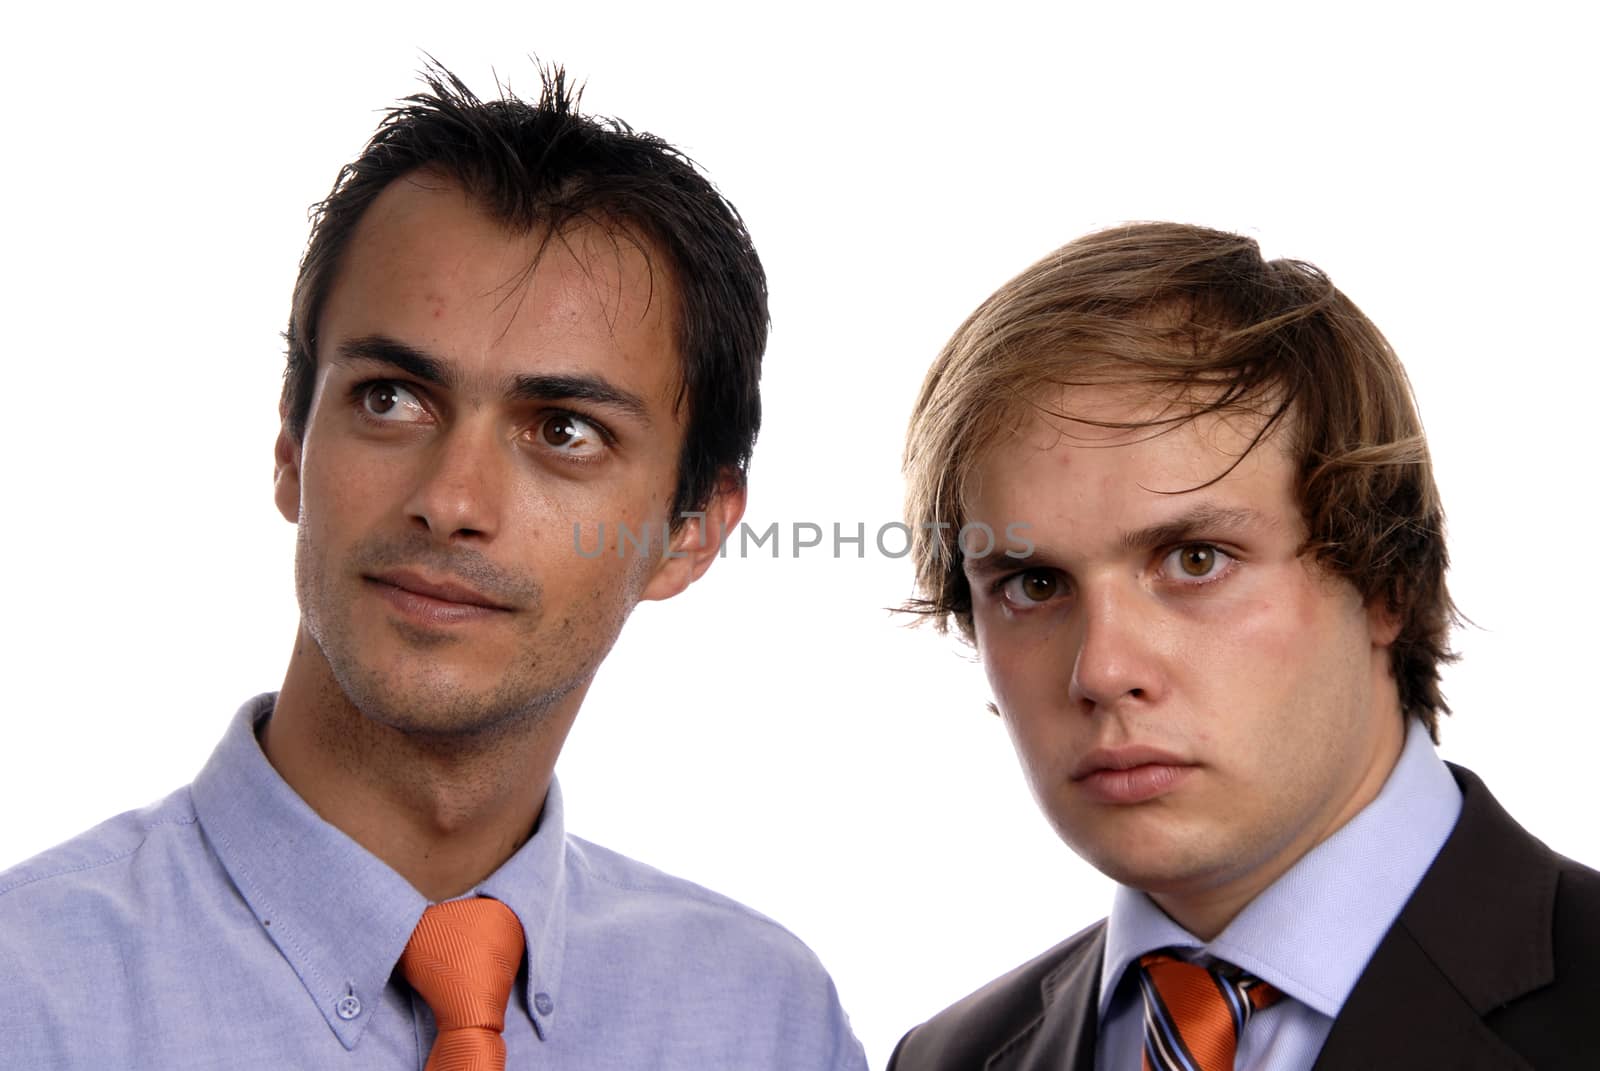 two young business men portrait on white.